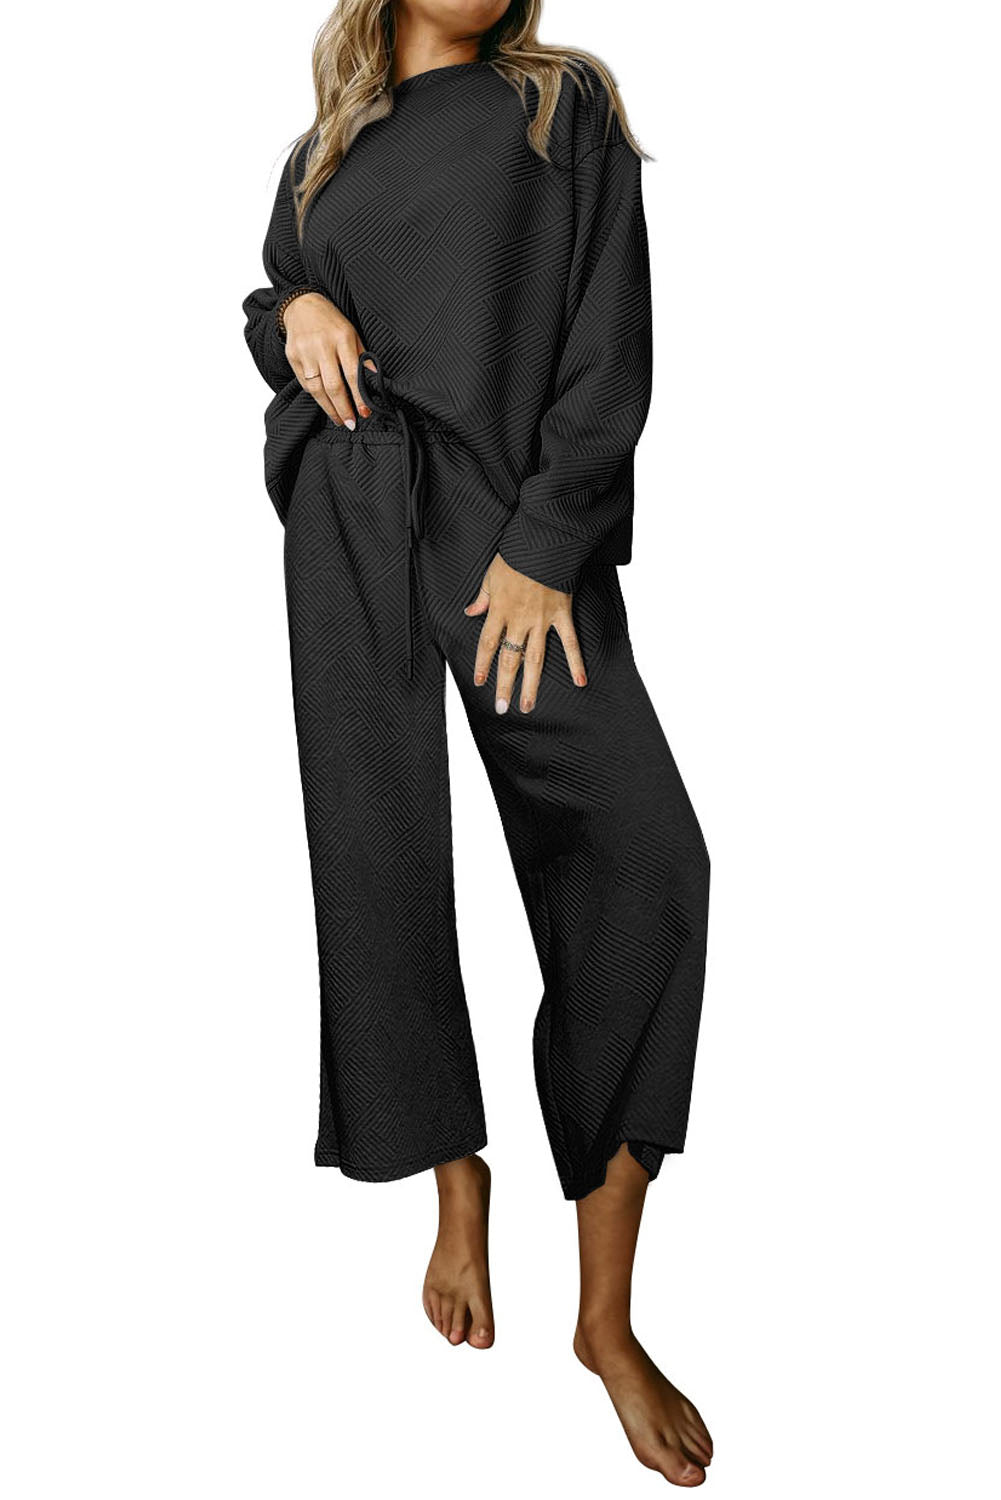 LC625266-2-S, LC625266-2-M, LC625266-2-L, LC625266-2-XL, LC625266-2-2XL, Black Ultra Loose Textured 2pcs Slouchy Outfit